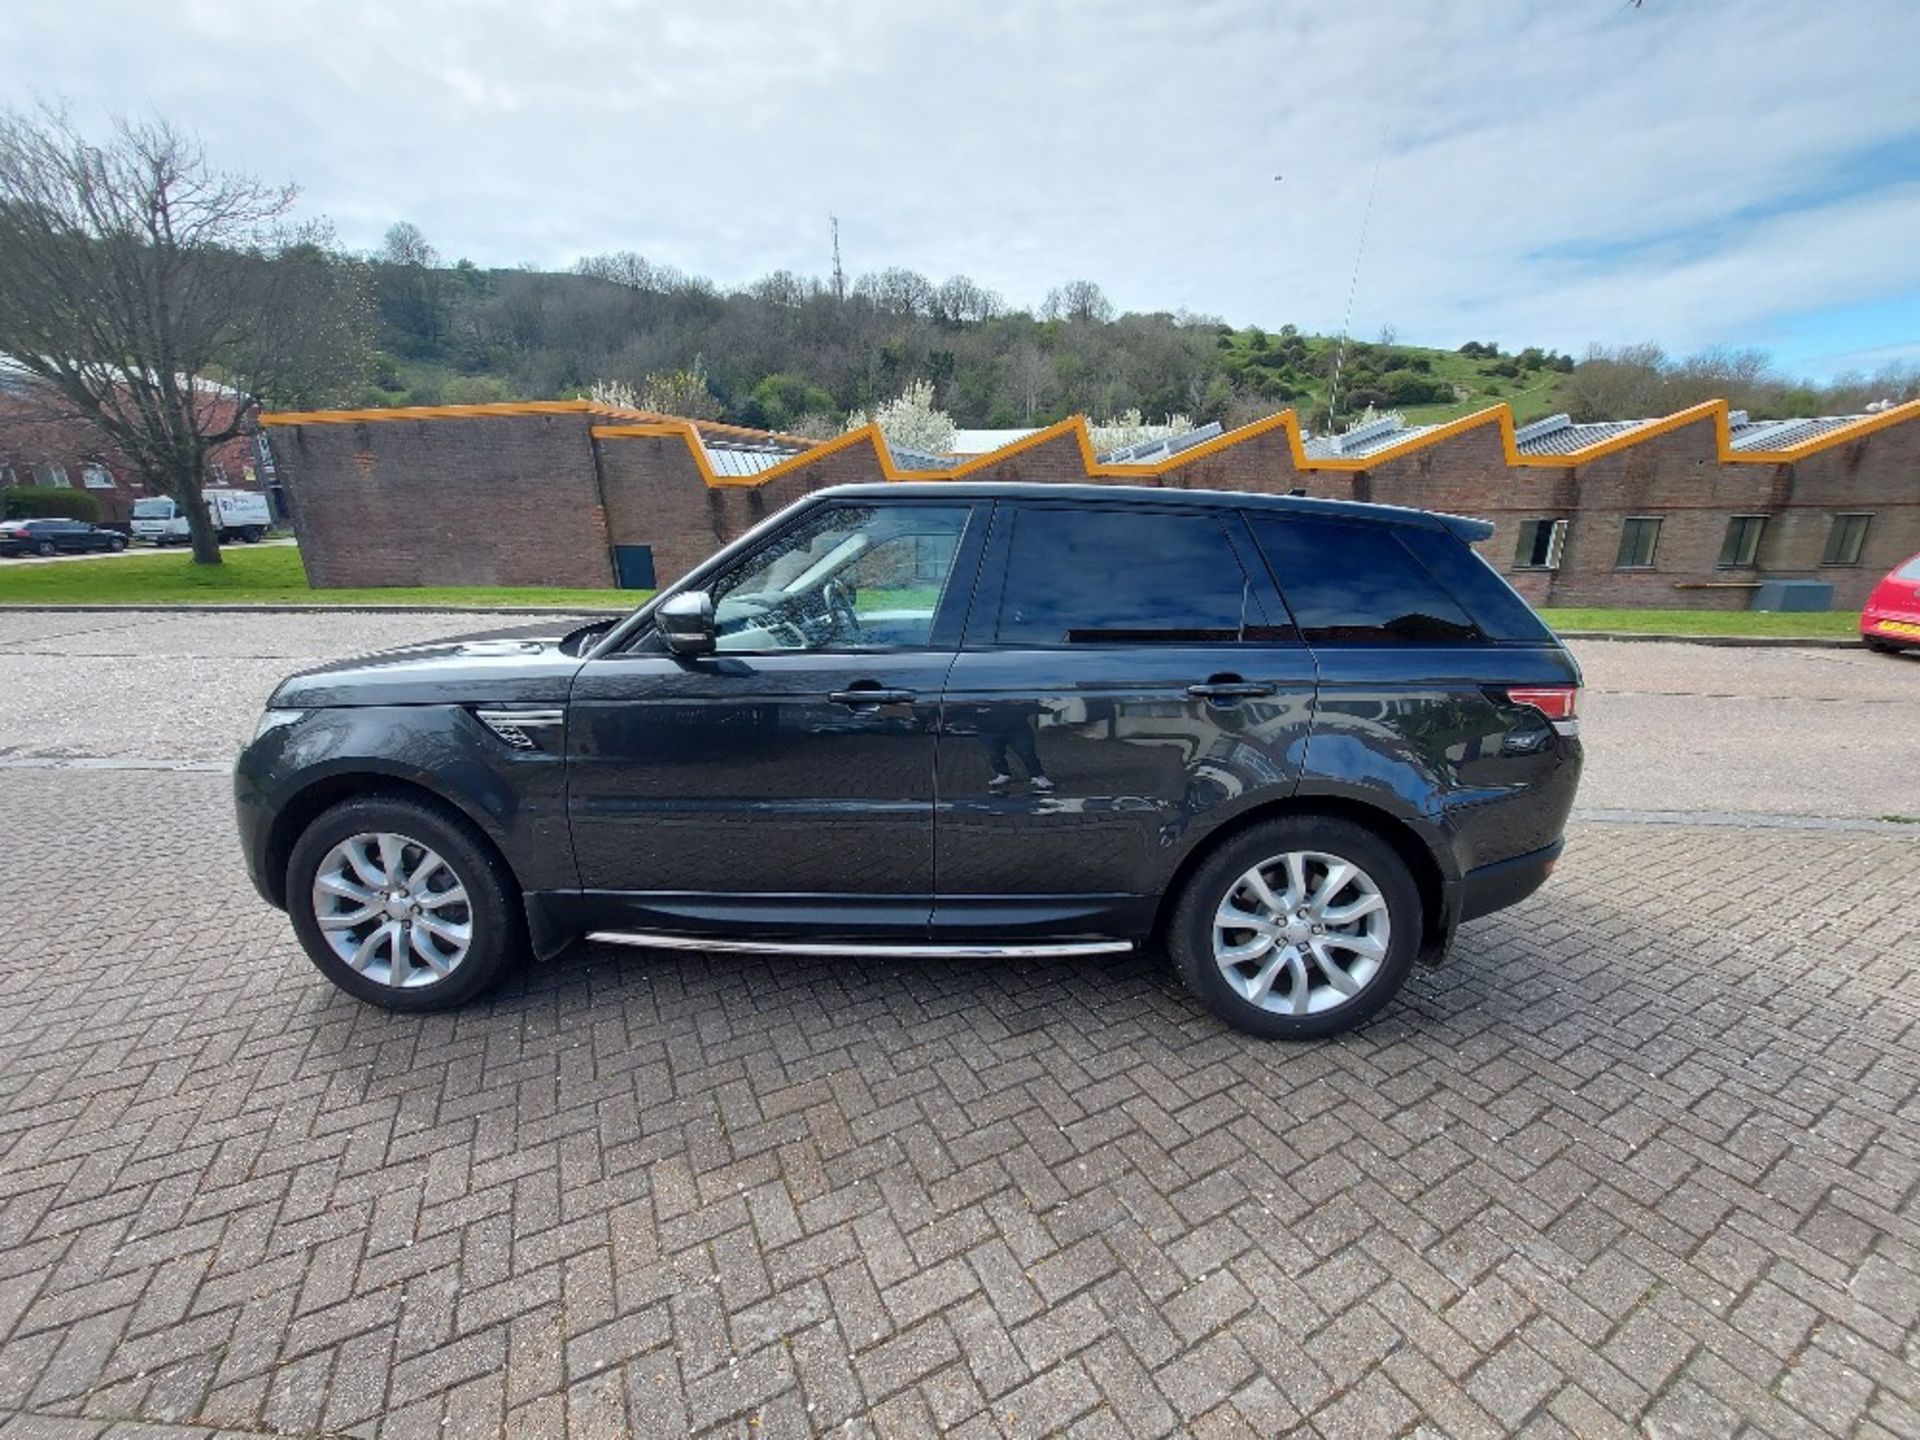 Range Rover Sport 3.0 SDV6 HSE Automatic - Image 7 of 18